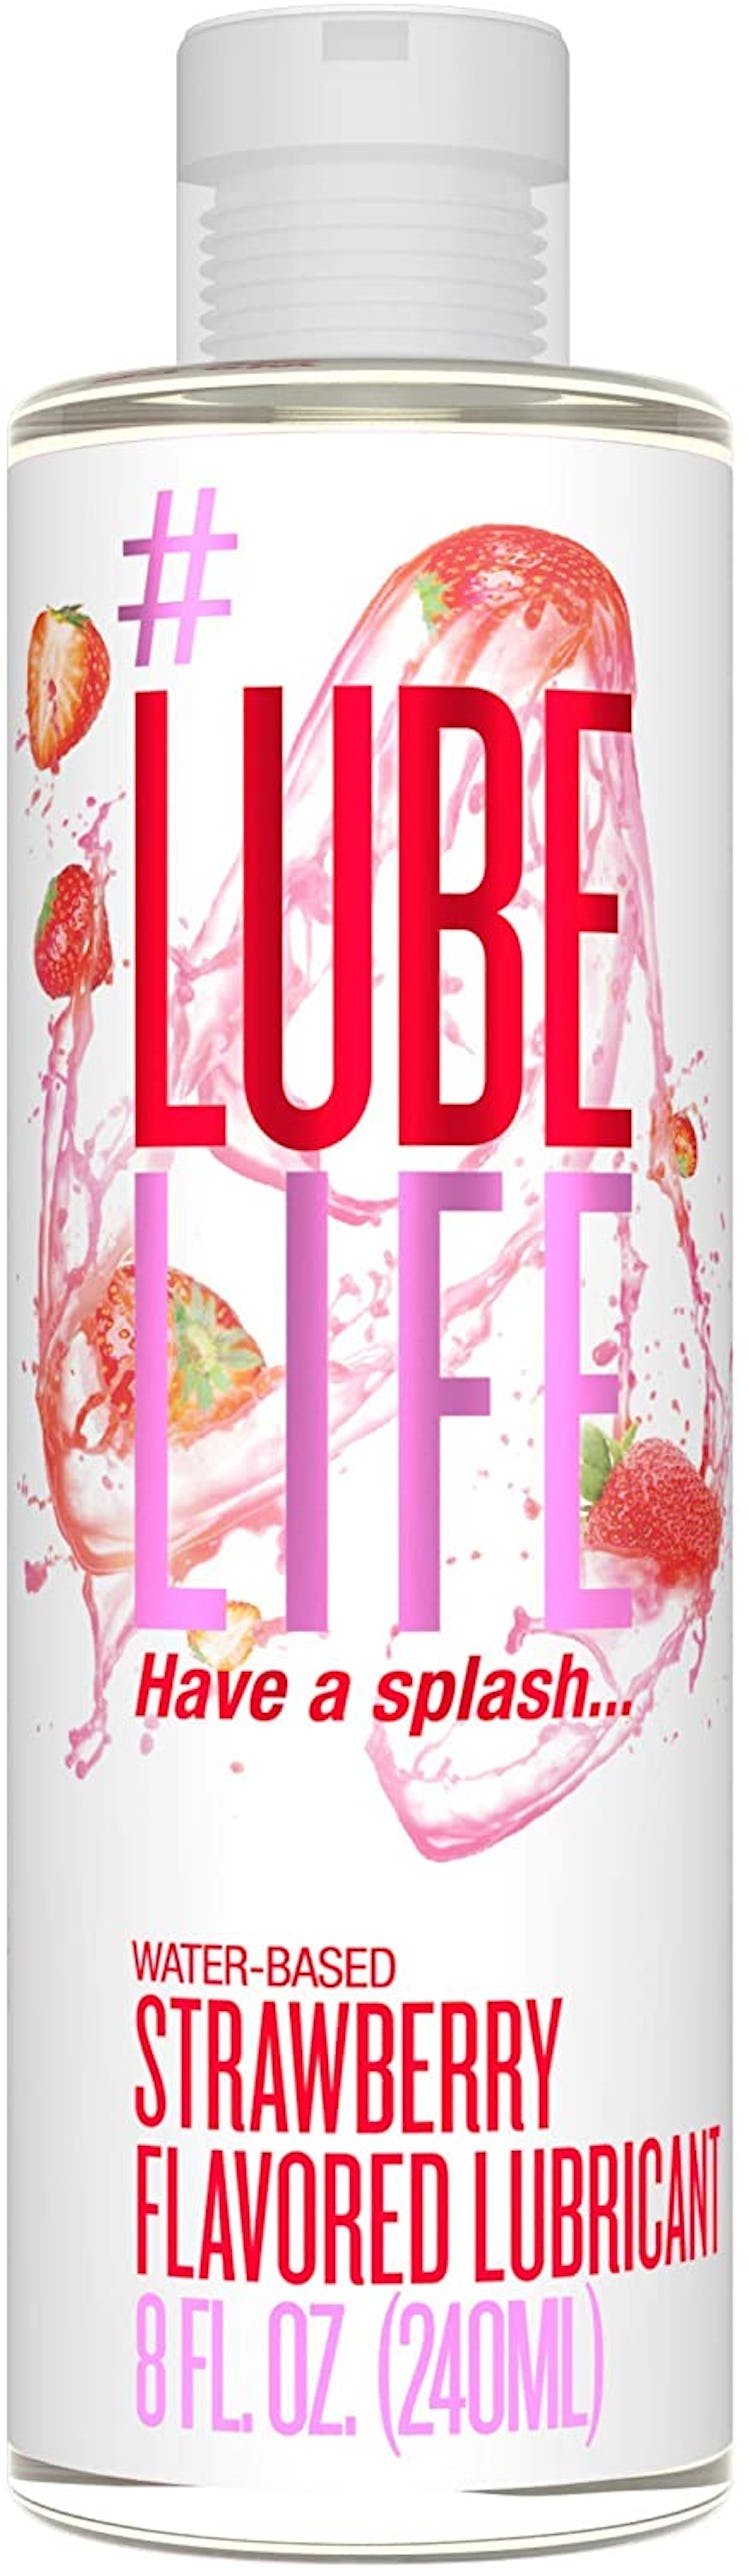 flavored lube